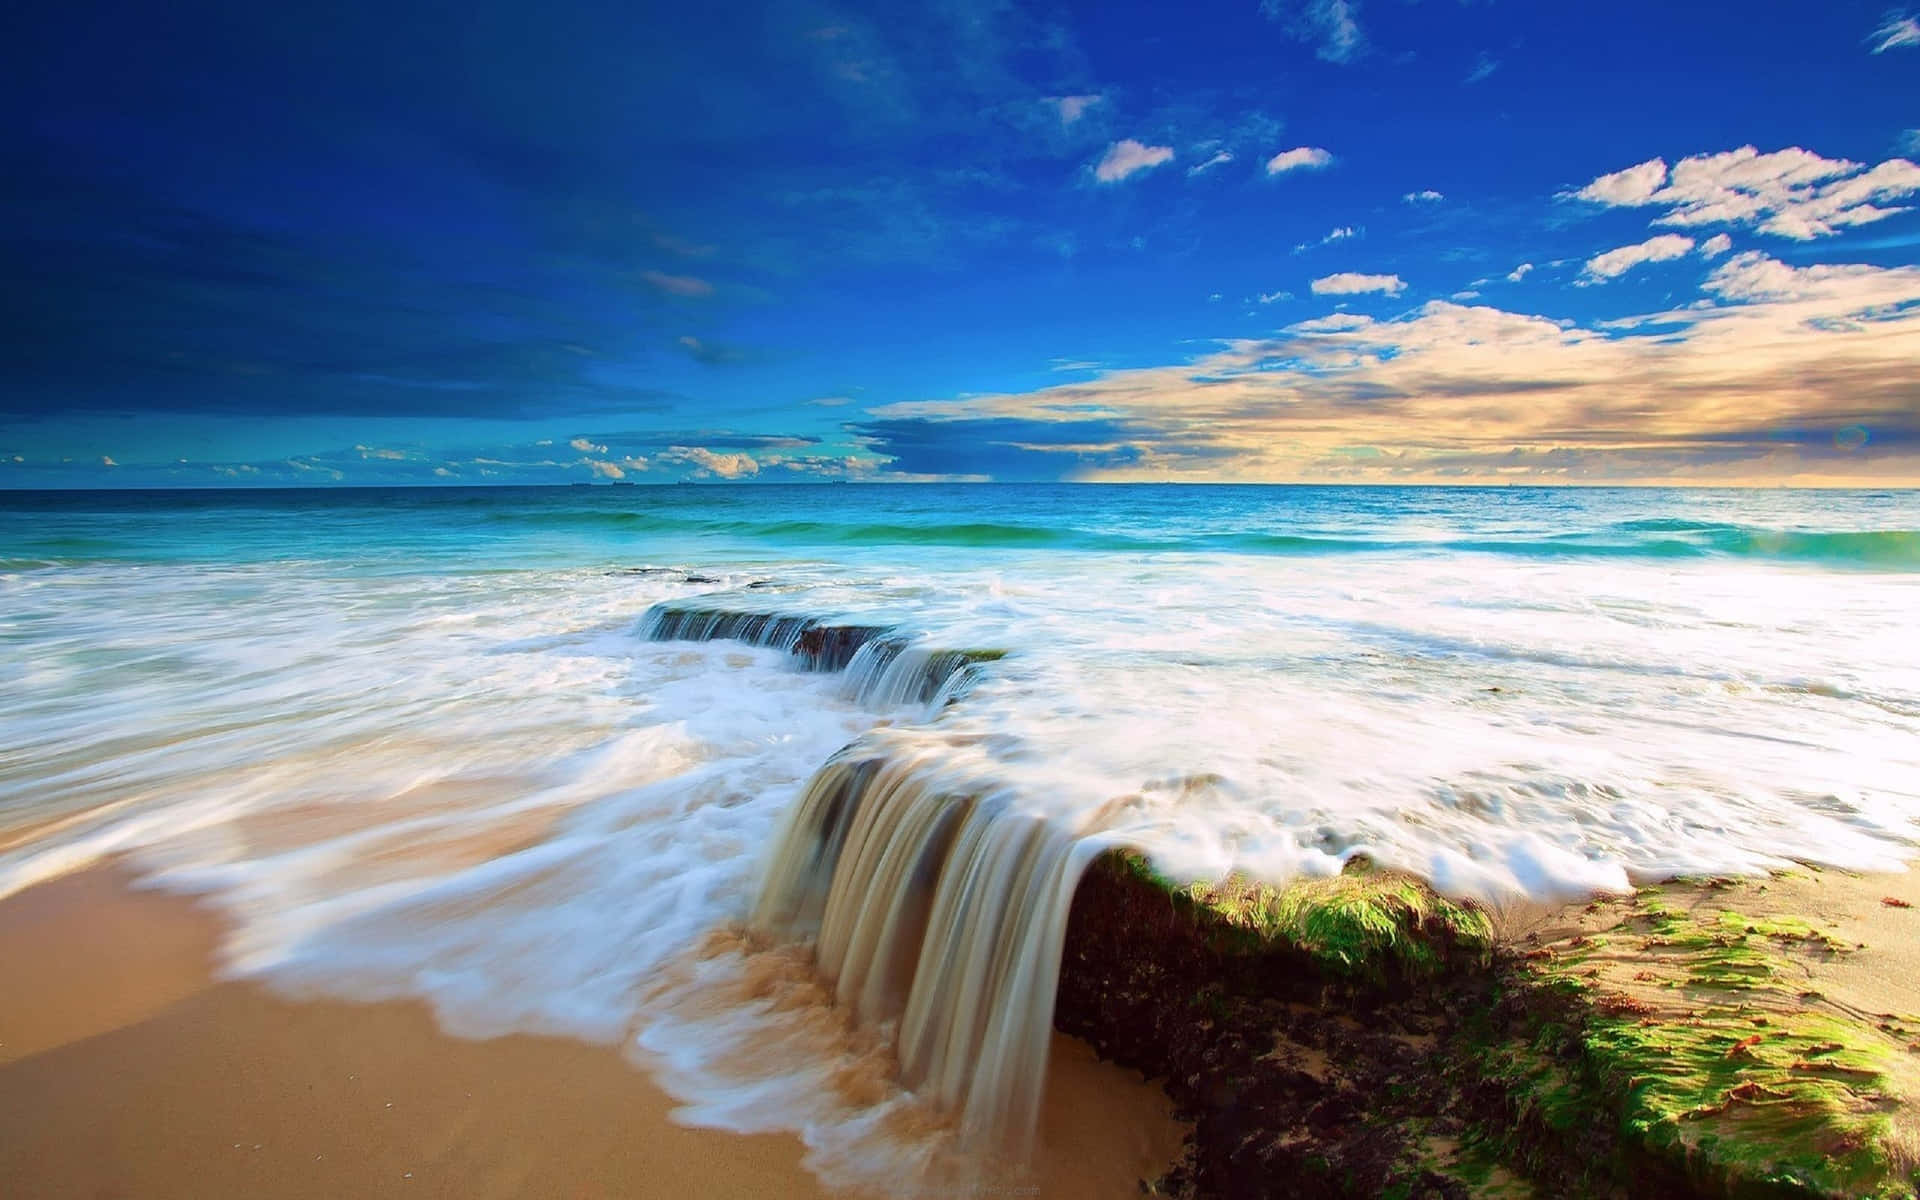 Turn your dreams into reality with this blissful beach themed background